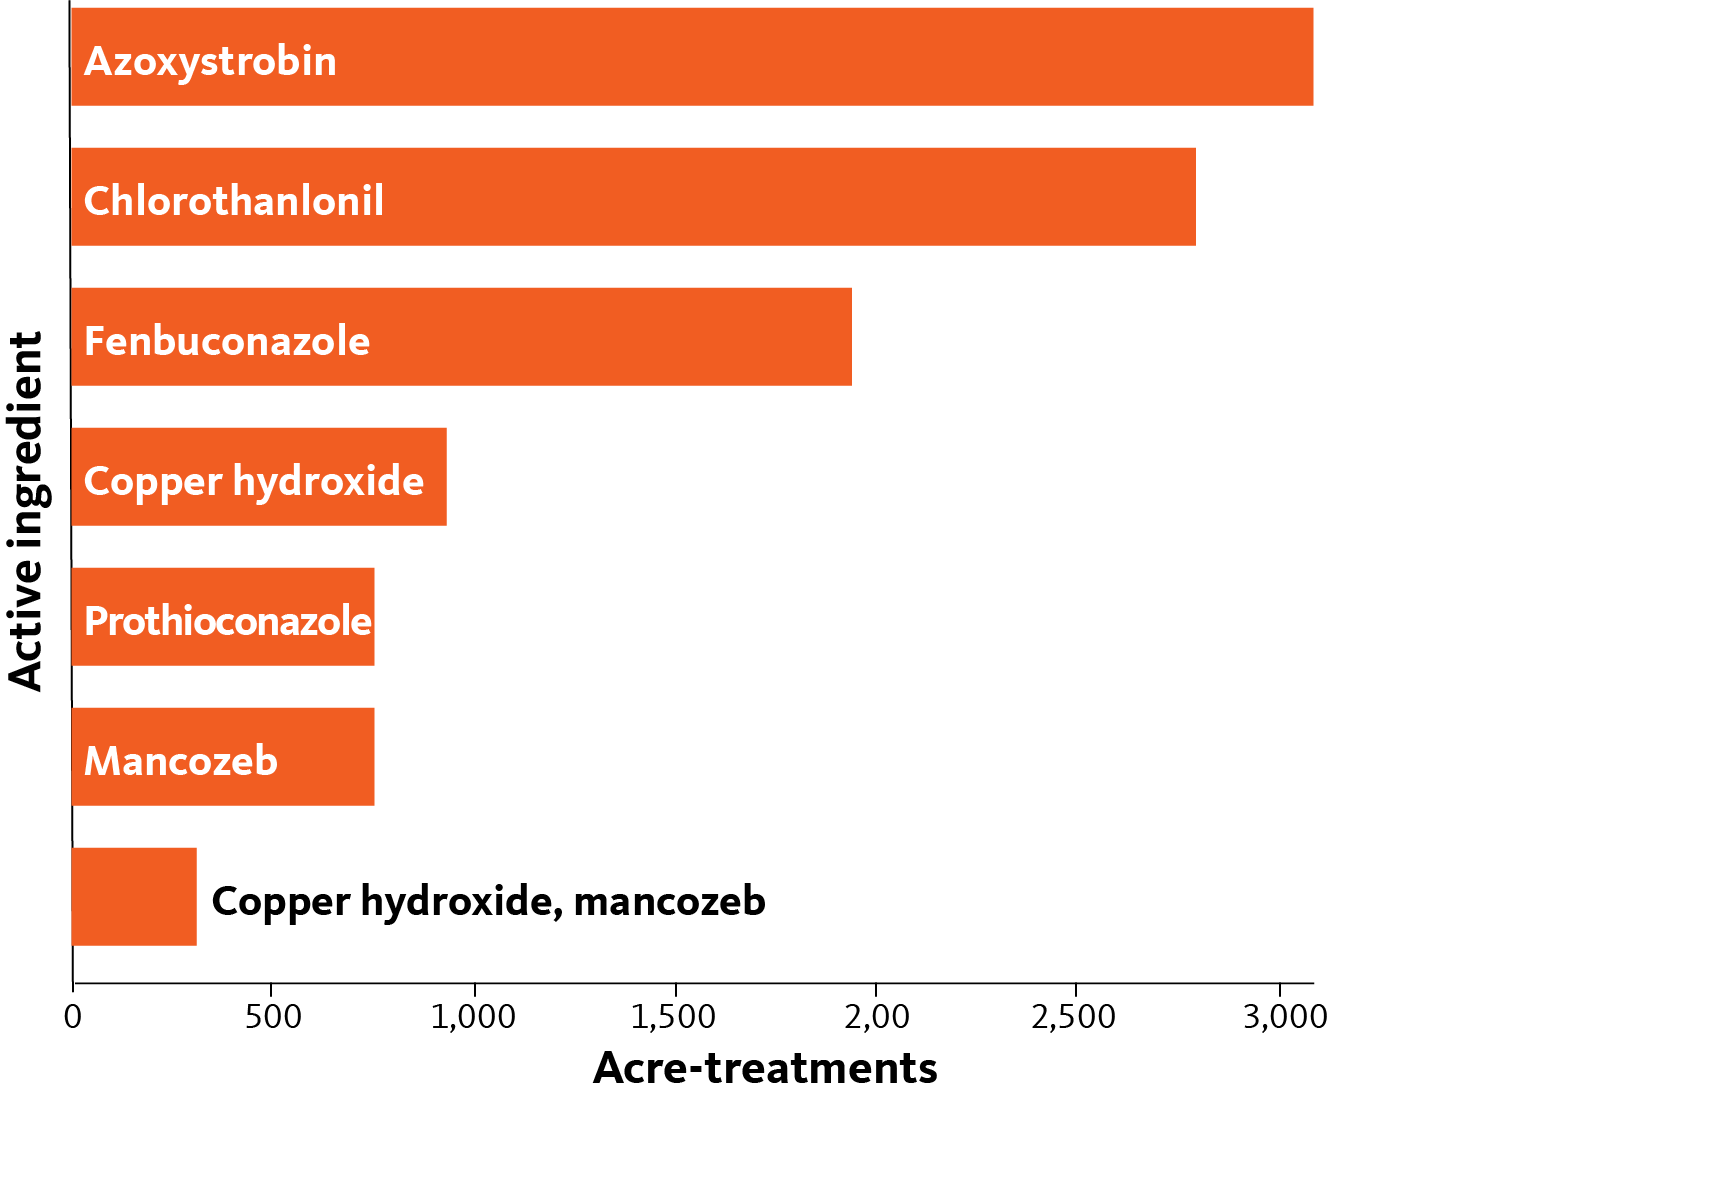 Bar chart showing common fungicides